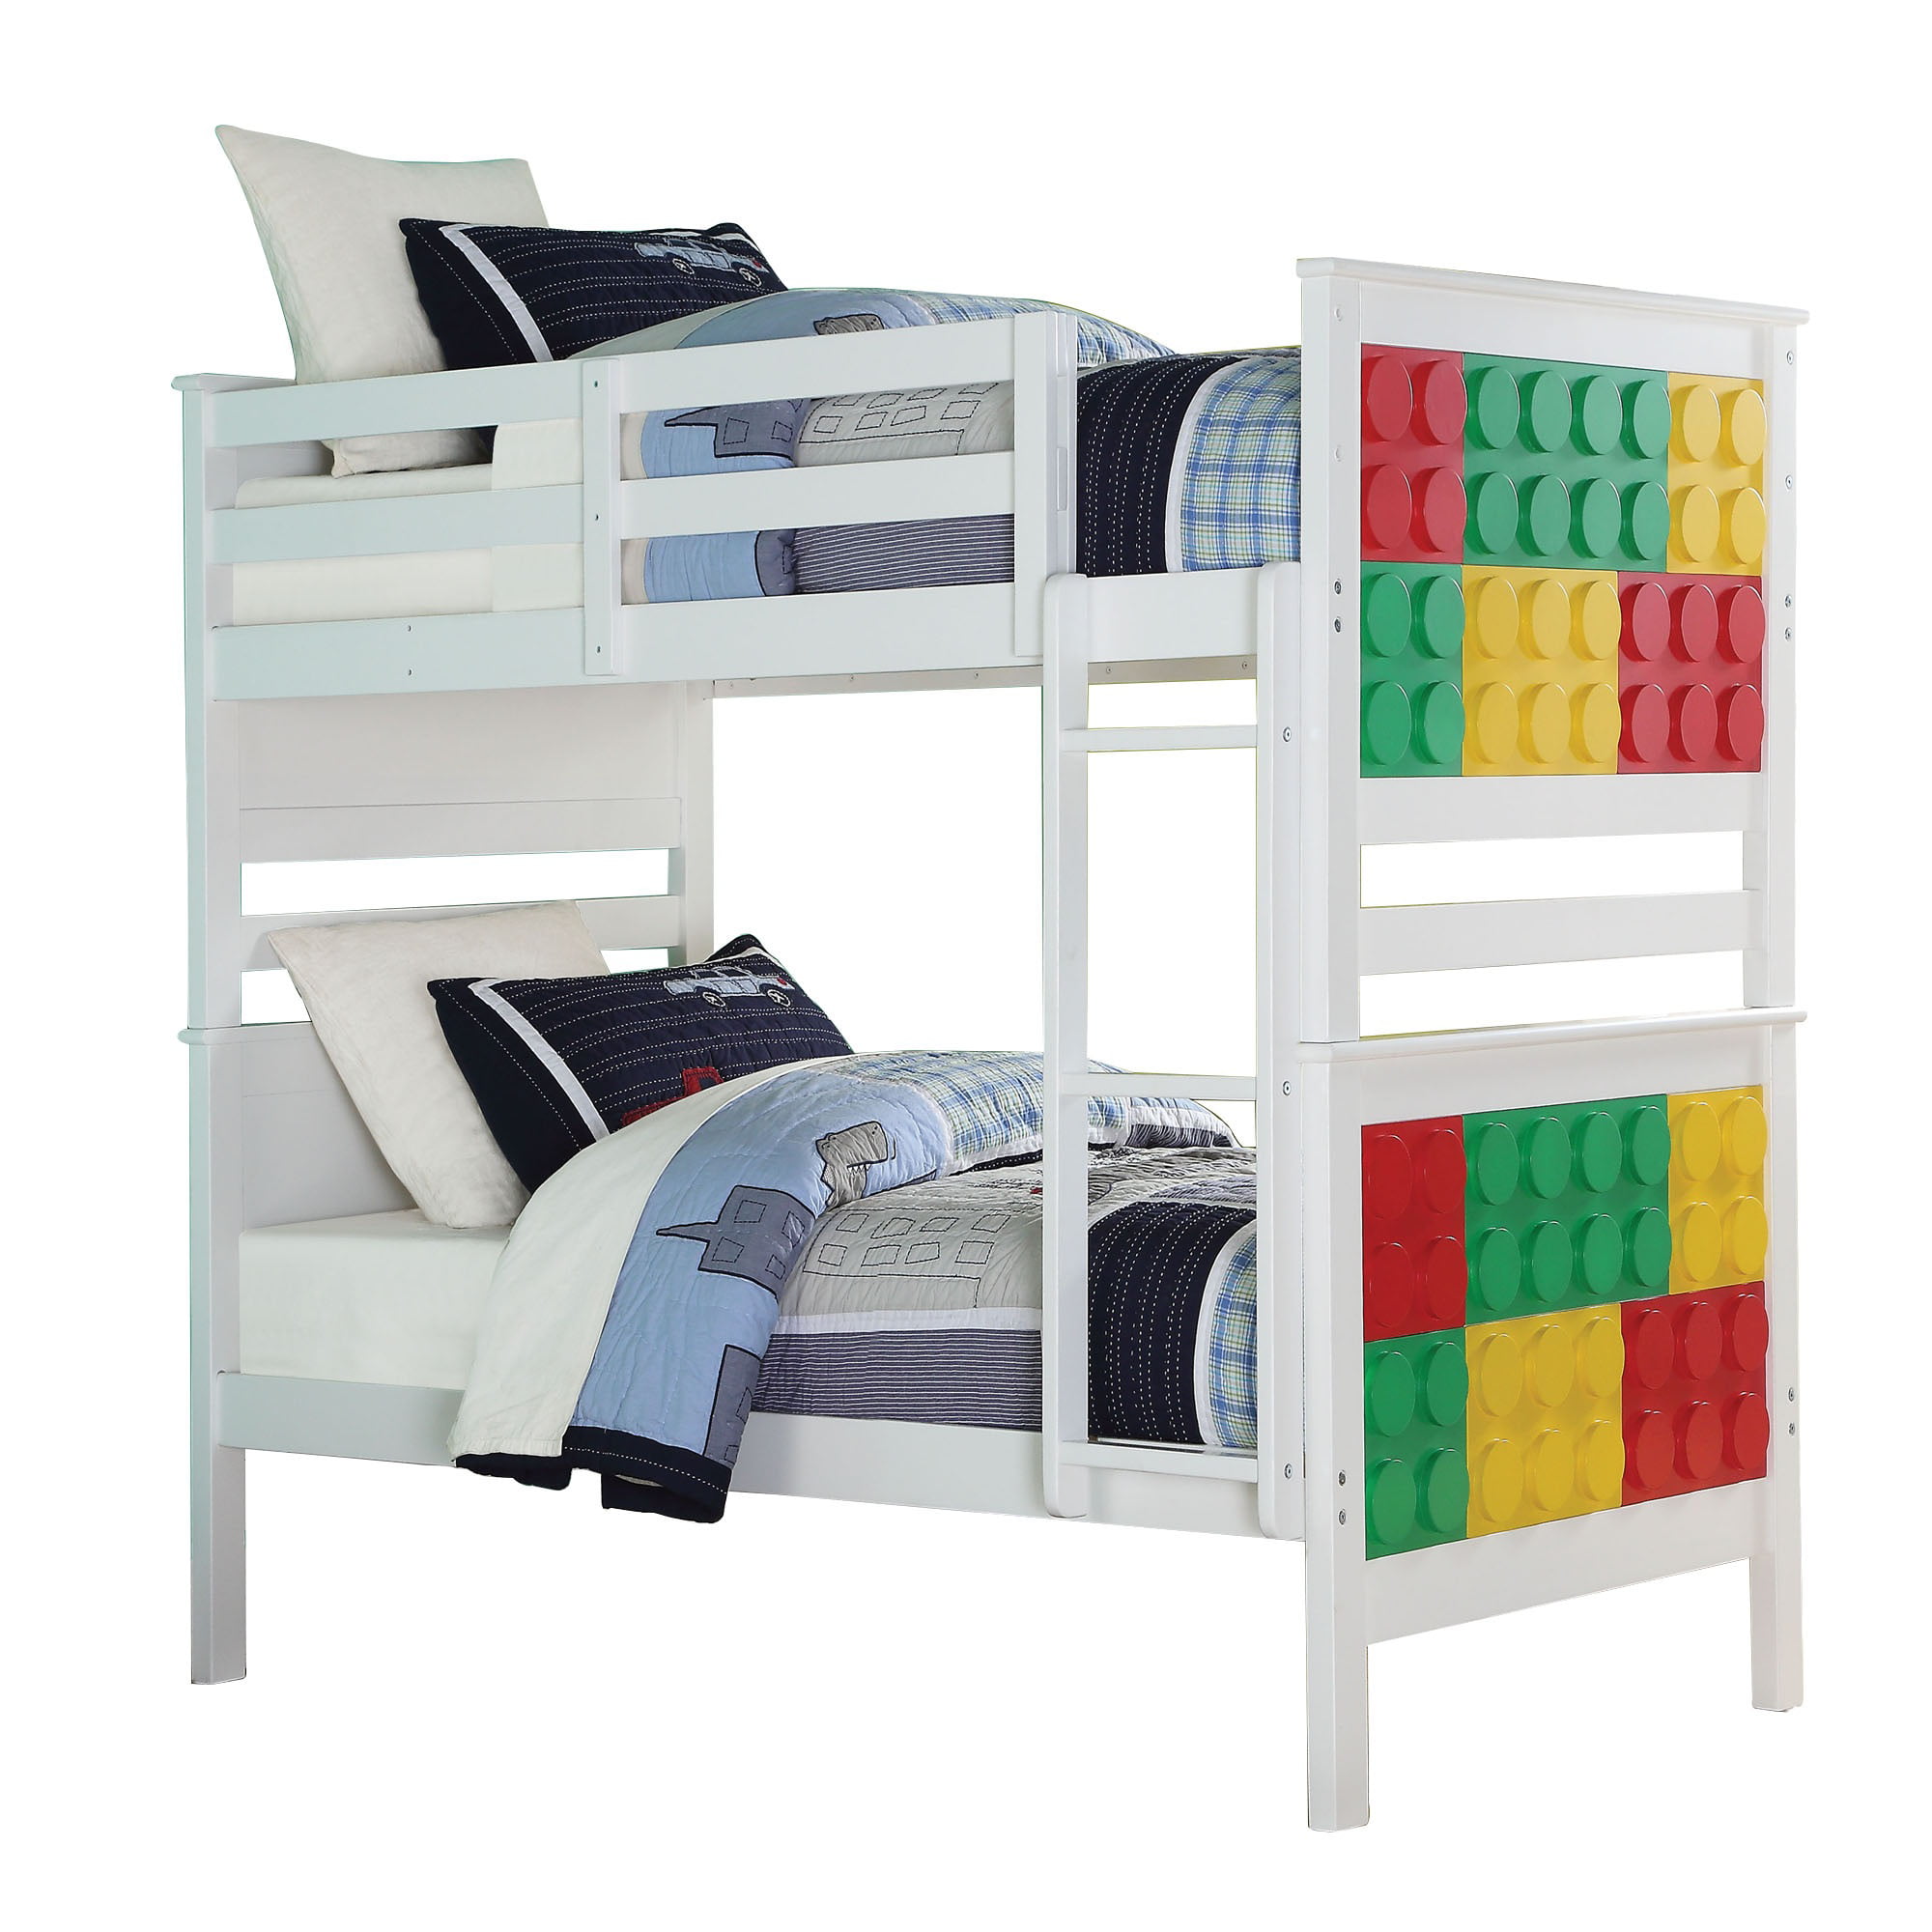 Wooden Twin Over Size Bunk Bed, Bunk Bed Blocker